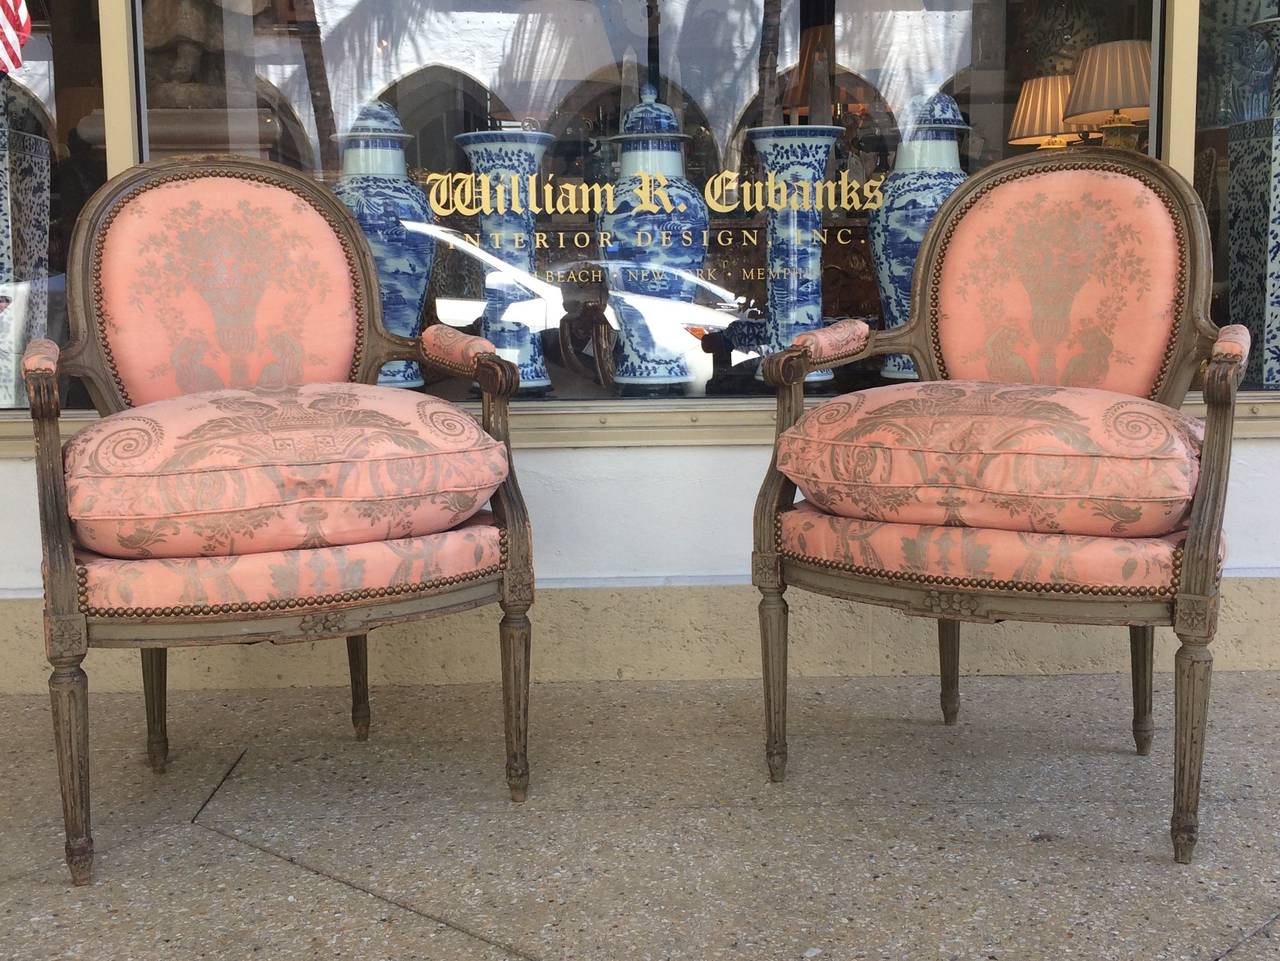 Beautiful pair of Louis XVI Grey-painted Fauteuils, upholstered in Apricot Fortuny fabric with loose seat cushion. Late 18th century.
